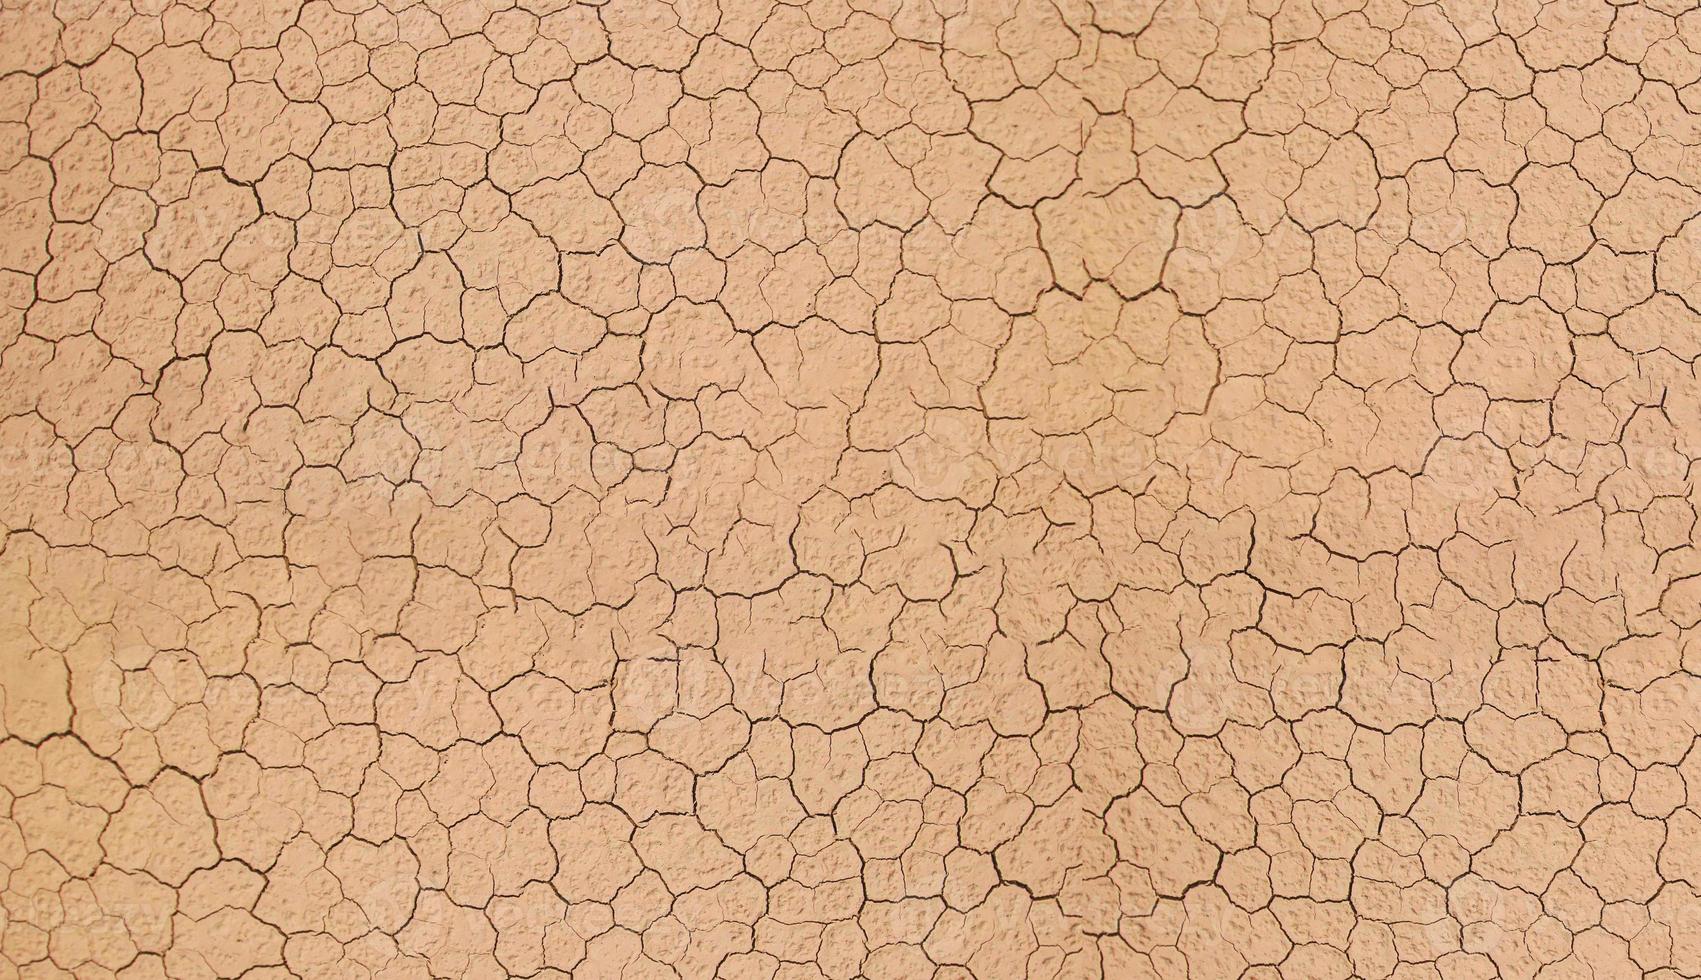 Texture of the earth with a crack on the surface photo